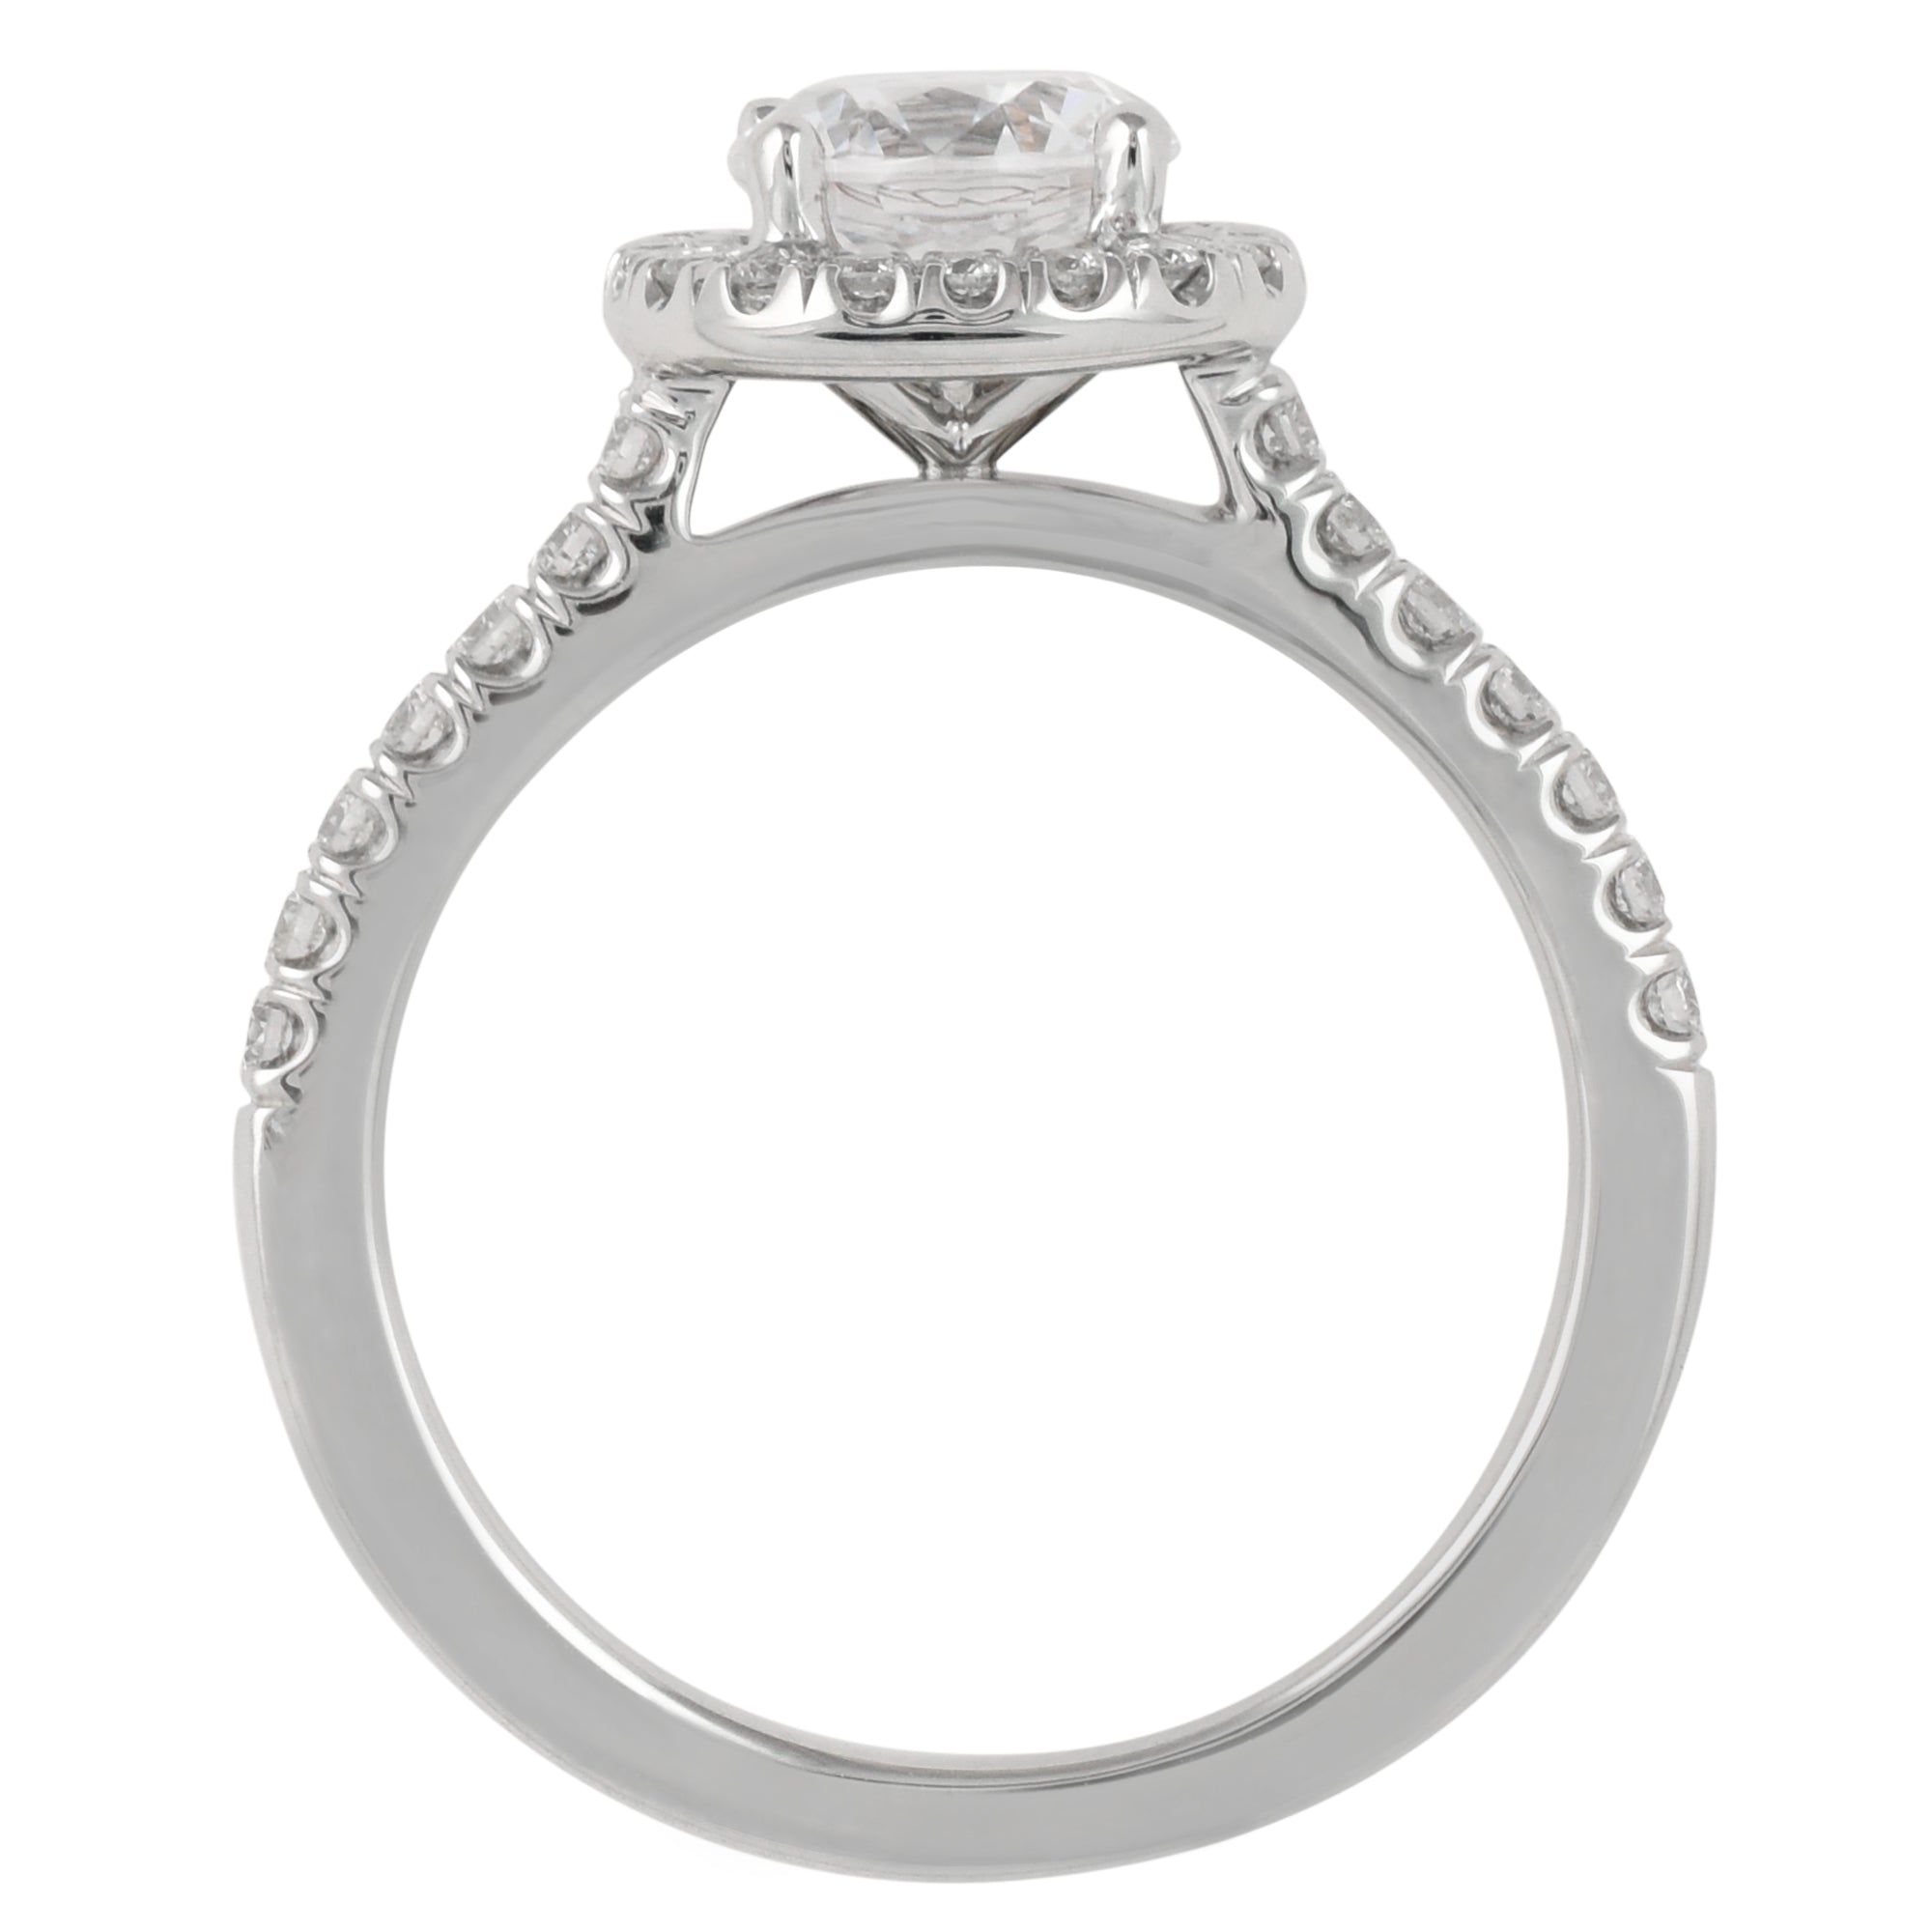 Martin Flyer Diamond Micro Pave Engagement Ring Setting in 14kt White Gold